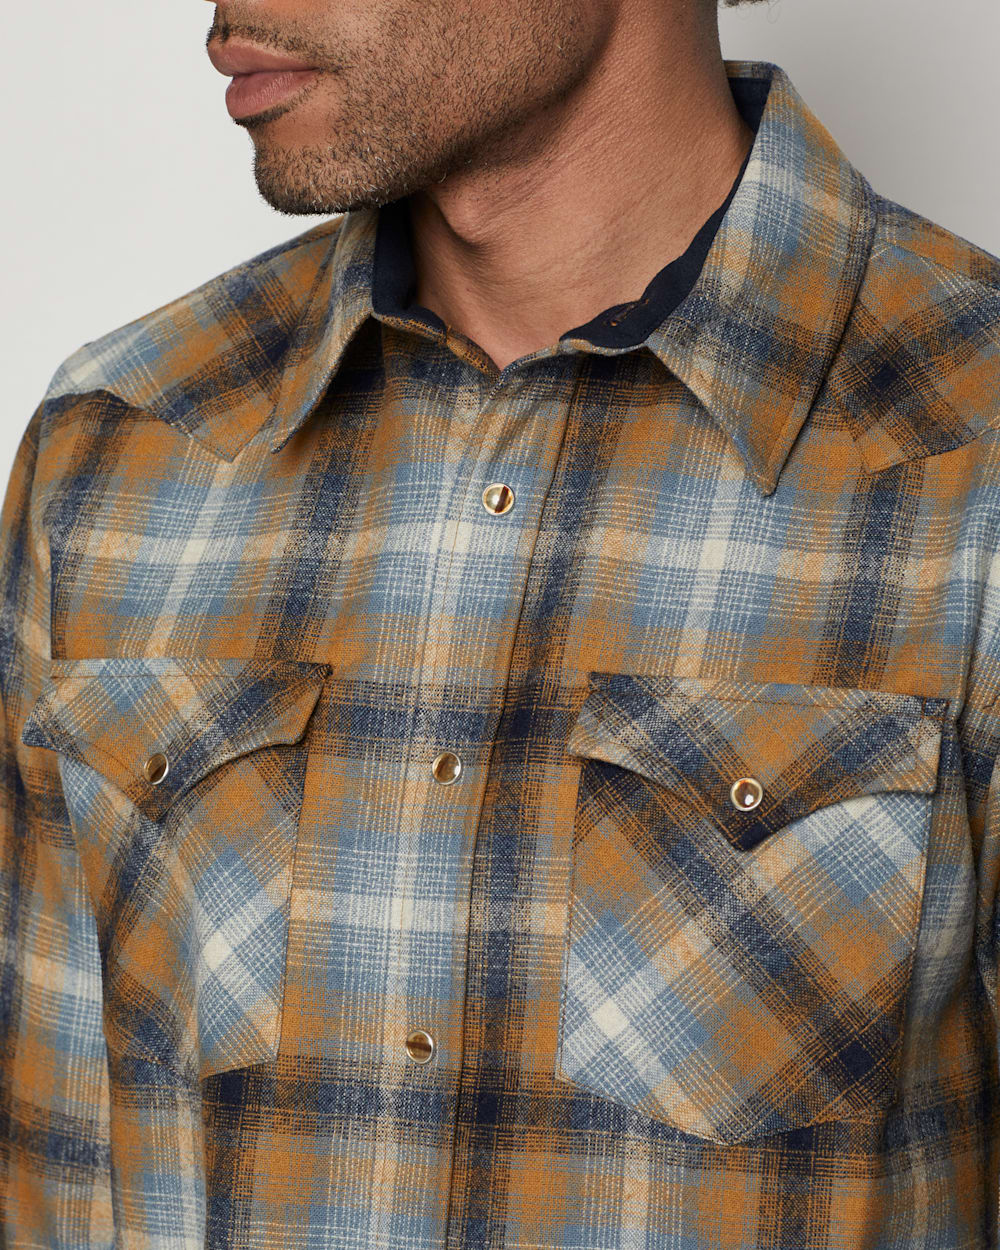 ALTERNATE VIEW OF MEN'S PLAID SNAP-FRONT WESTERN CANYON SHIRT IN BLUE/COPPER OMBRE image number 4